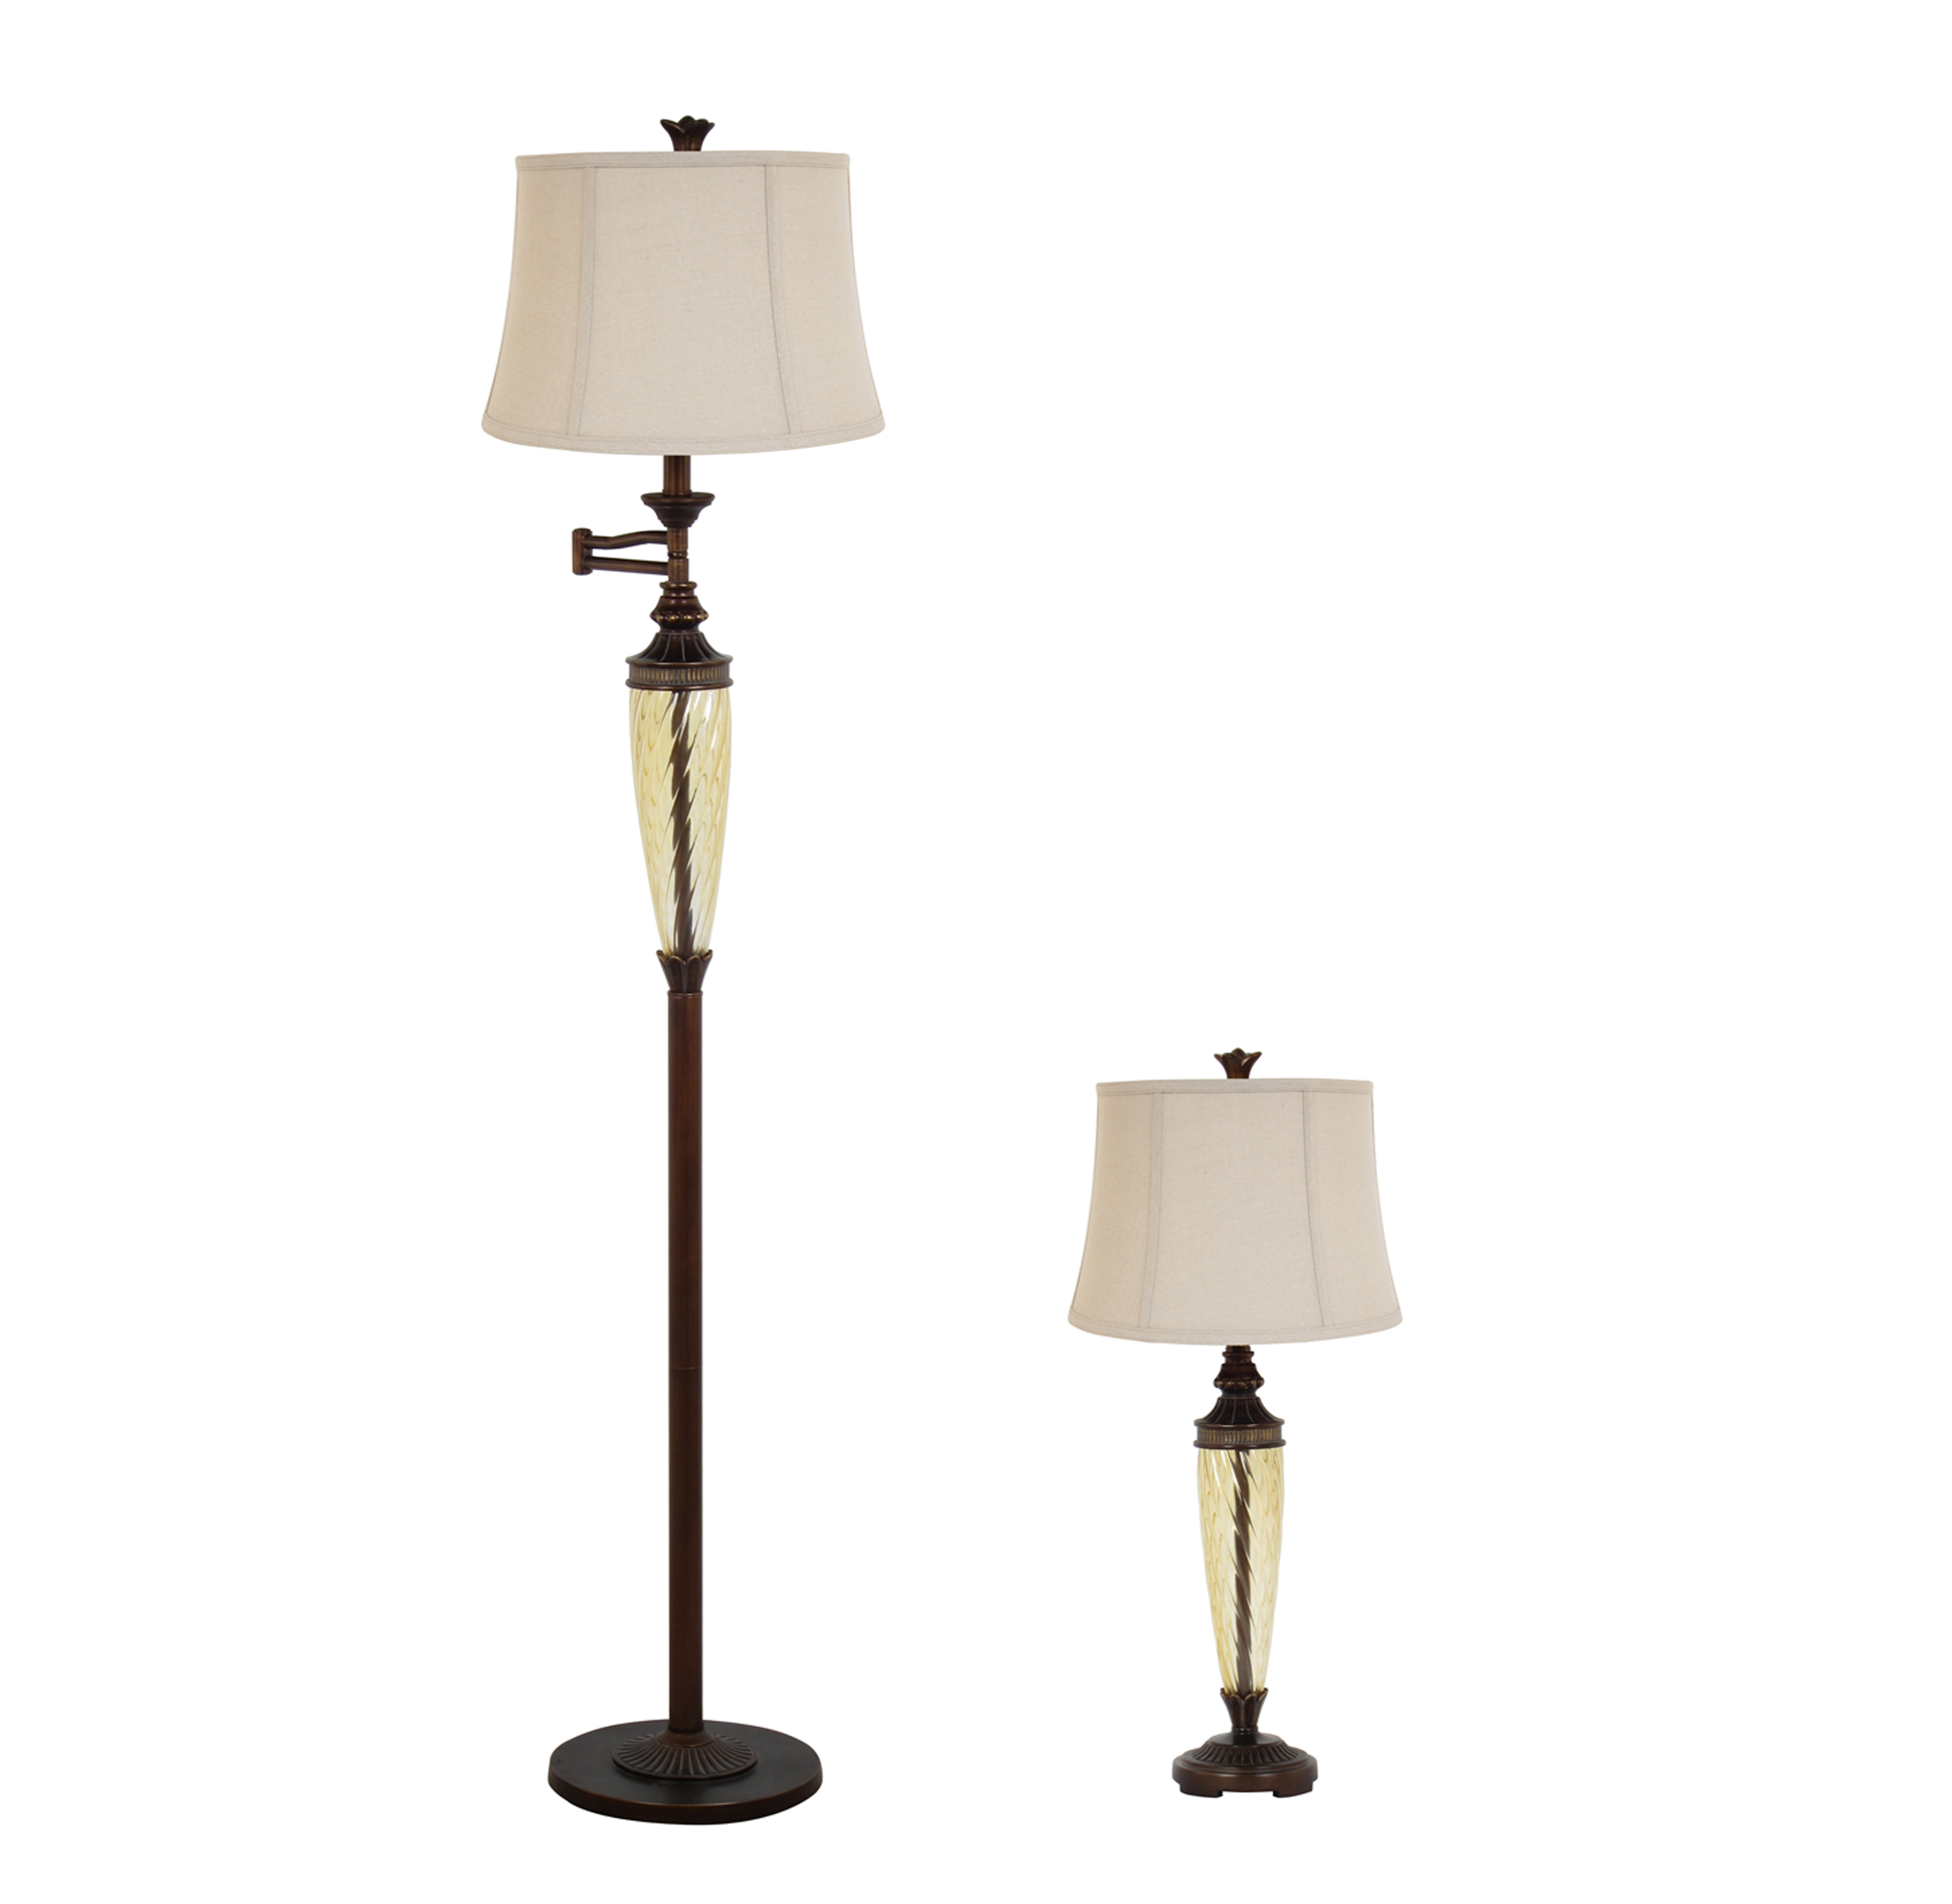 Legacy Home Furnishing and Decor Dark Bronze Lamp Set With Decorative Glass Fonts